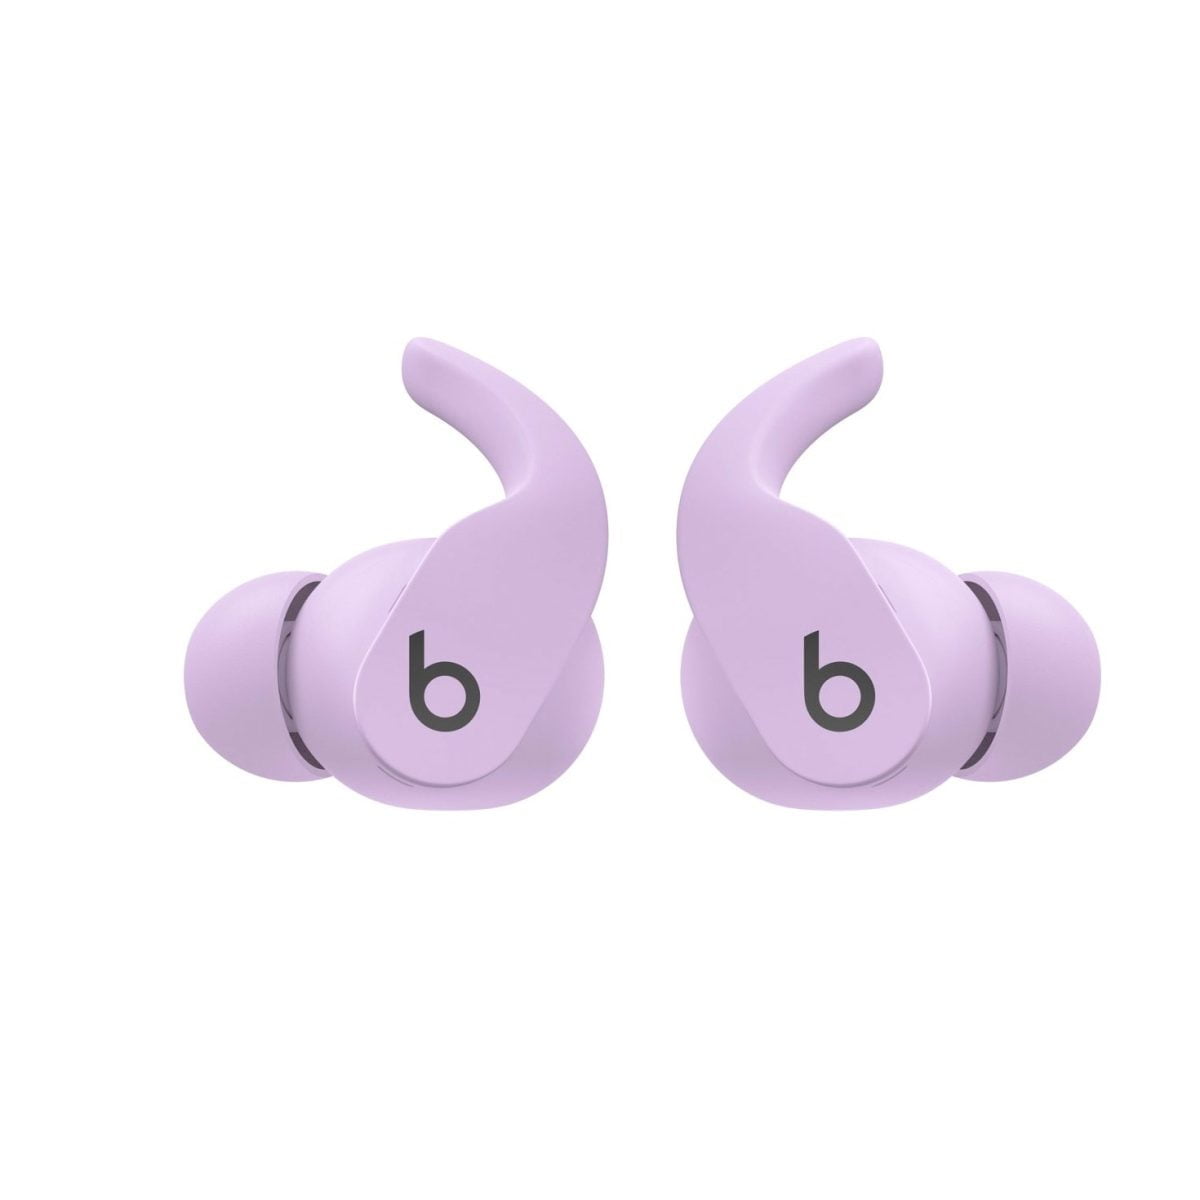 6490270Cv11A Beats &Lt;H1 Class=&Quot;Heading-5 V-Fw-Regular&Quot;&Gt;Beats Fit Pro True Wireless Noise Cancelling In-Ear Headphones - Purple&Lt;/H1&Gt; Https://Www.youtube.com/Watch?V=Kzzb-Qssefg &Lt;Div Class=&Quot;Features-List-Container&Quot;&Gt; &Lt;Div Class=&Quot;Features-List All-Features&Quot;&Gt; &Lt;Div Class=&Quot;List-Row&Quot;&Gt; &Lt;P Class=&Quot;Body-Copy&Quot;&Gt;Beats Fit Pro Is Engineered To Deliver Powerful, Balanced Sound Via A Custom Acoustic Platform That Stays With You Through Your Daily Activities.a Proprietary, Dual-Element Diaphragm Driver Resides Within A Twochamber Housing Inside The Bluetooth® Earbuds, Resulting In Clear Sound With Outstanding Stereo Separation. An Advanced Digital Processor Then Optimizes Audio Performance For Loudness And Clarity, While Simultaneously Ensuring Clean Noise-Cancellation.beats Fit Pro Supports Spatial Audio With Dynamic Head Tracking For Immersive Music, Movies, And Games. Dynamic Head Tracking Uses Gyroscopes And Accelerometers To Adjust The Sound As You Turn Your Head, For A Multi-Dimensional Experience That Makes You Feel Like You’re Inside Of It.&Lt;/P&Gt; &Lt;/Div&Gt; &Lt;/Div&Gt; &Lt;/Div&Gt; Beats Fit Pro Beats Fit Pro True Wireless Noise Cancelling In-Ear Headphones - Purple Mk2H3